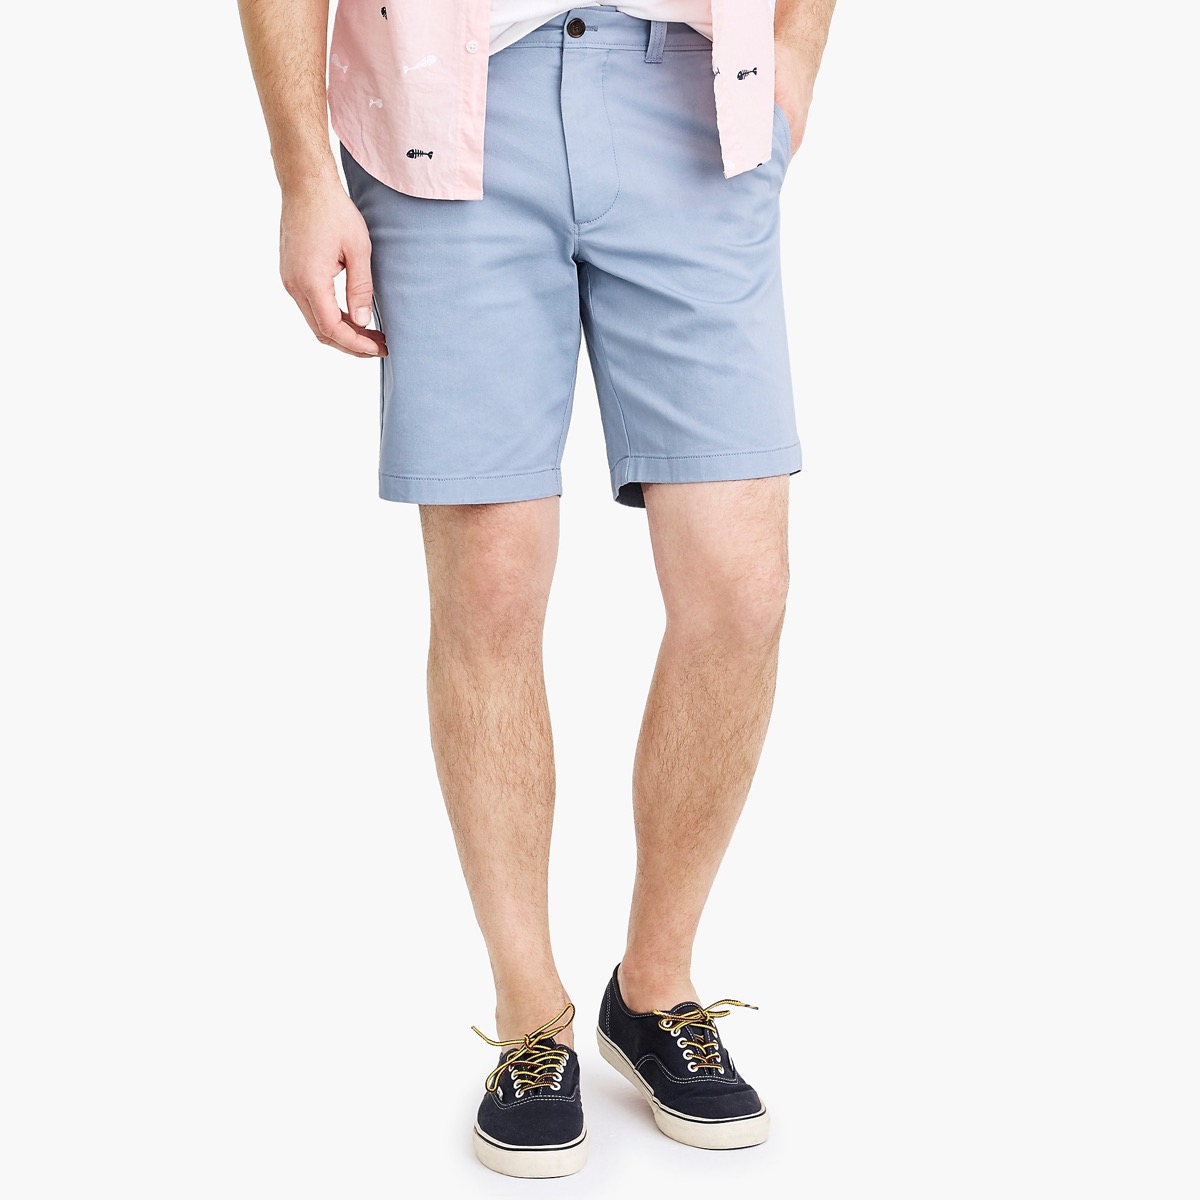 Blue Chino Shorts From J.Crew {Cheap Warm Weather Essentials}